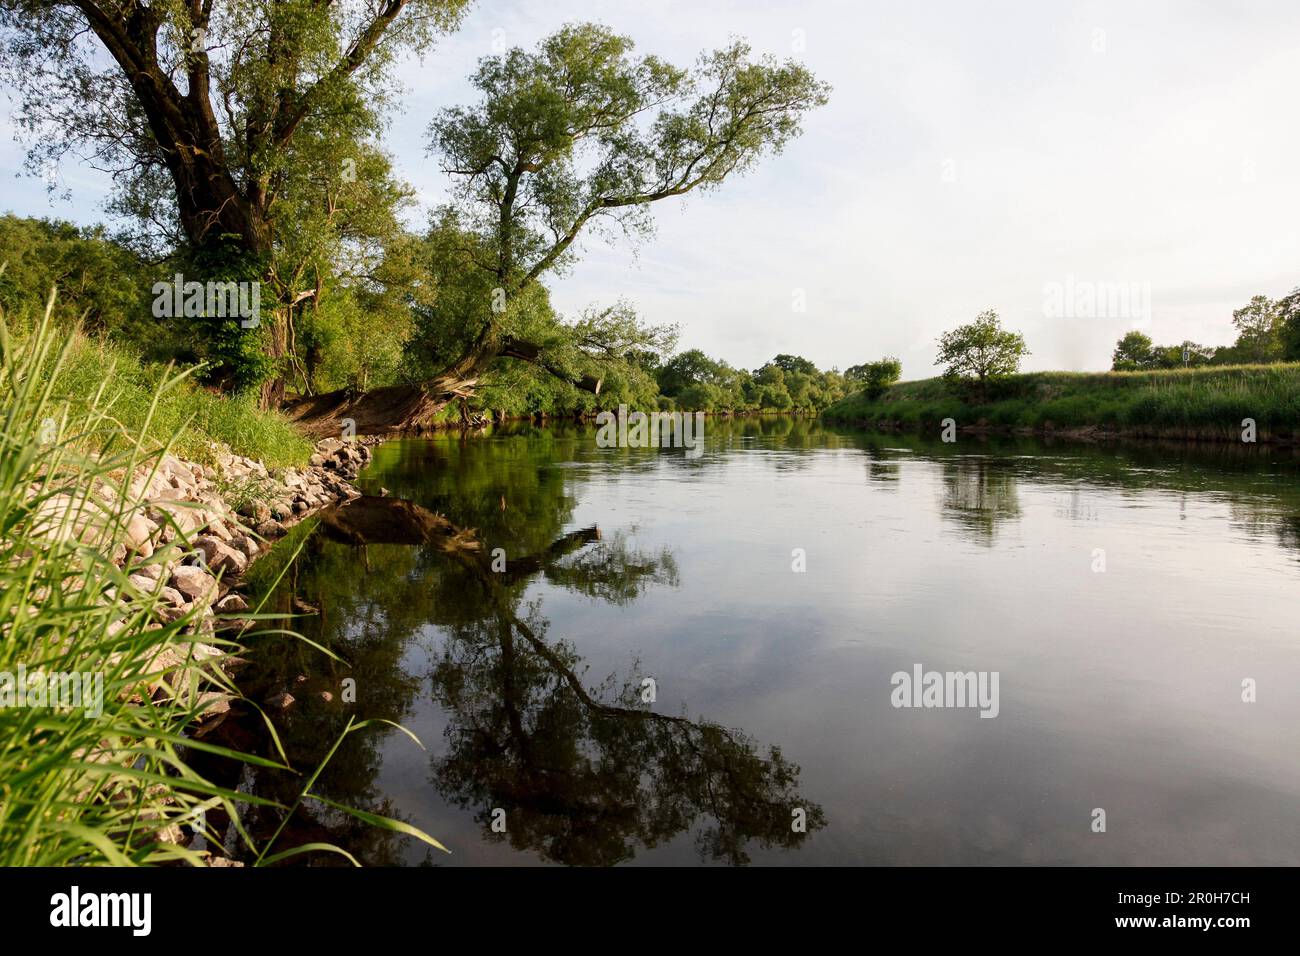 Scenery at river Mulde, Grimma, Saxony, Germany Stock Photo